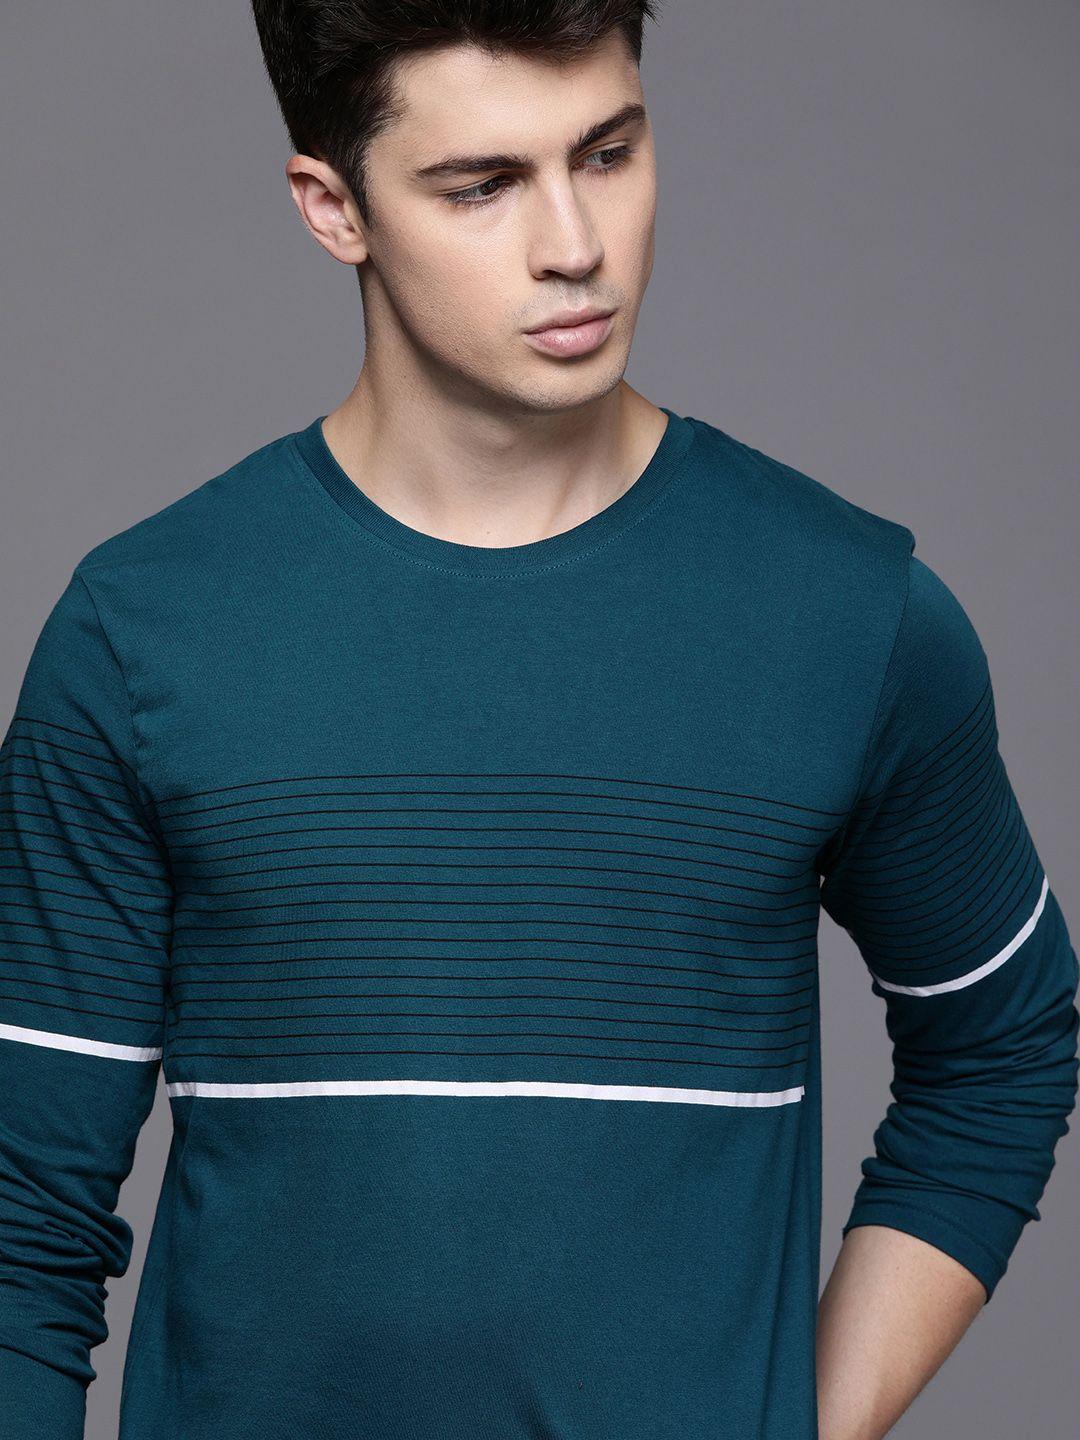 wrogn men teal blue striped slim fit round neck pure cotton t-shirt